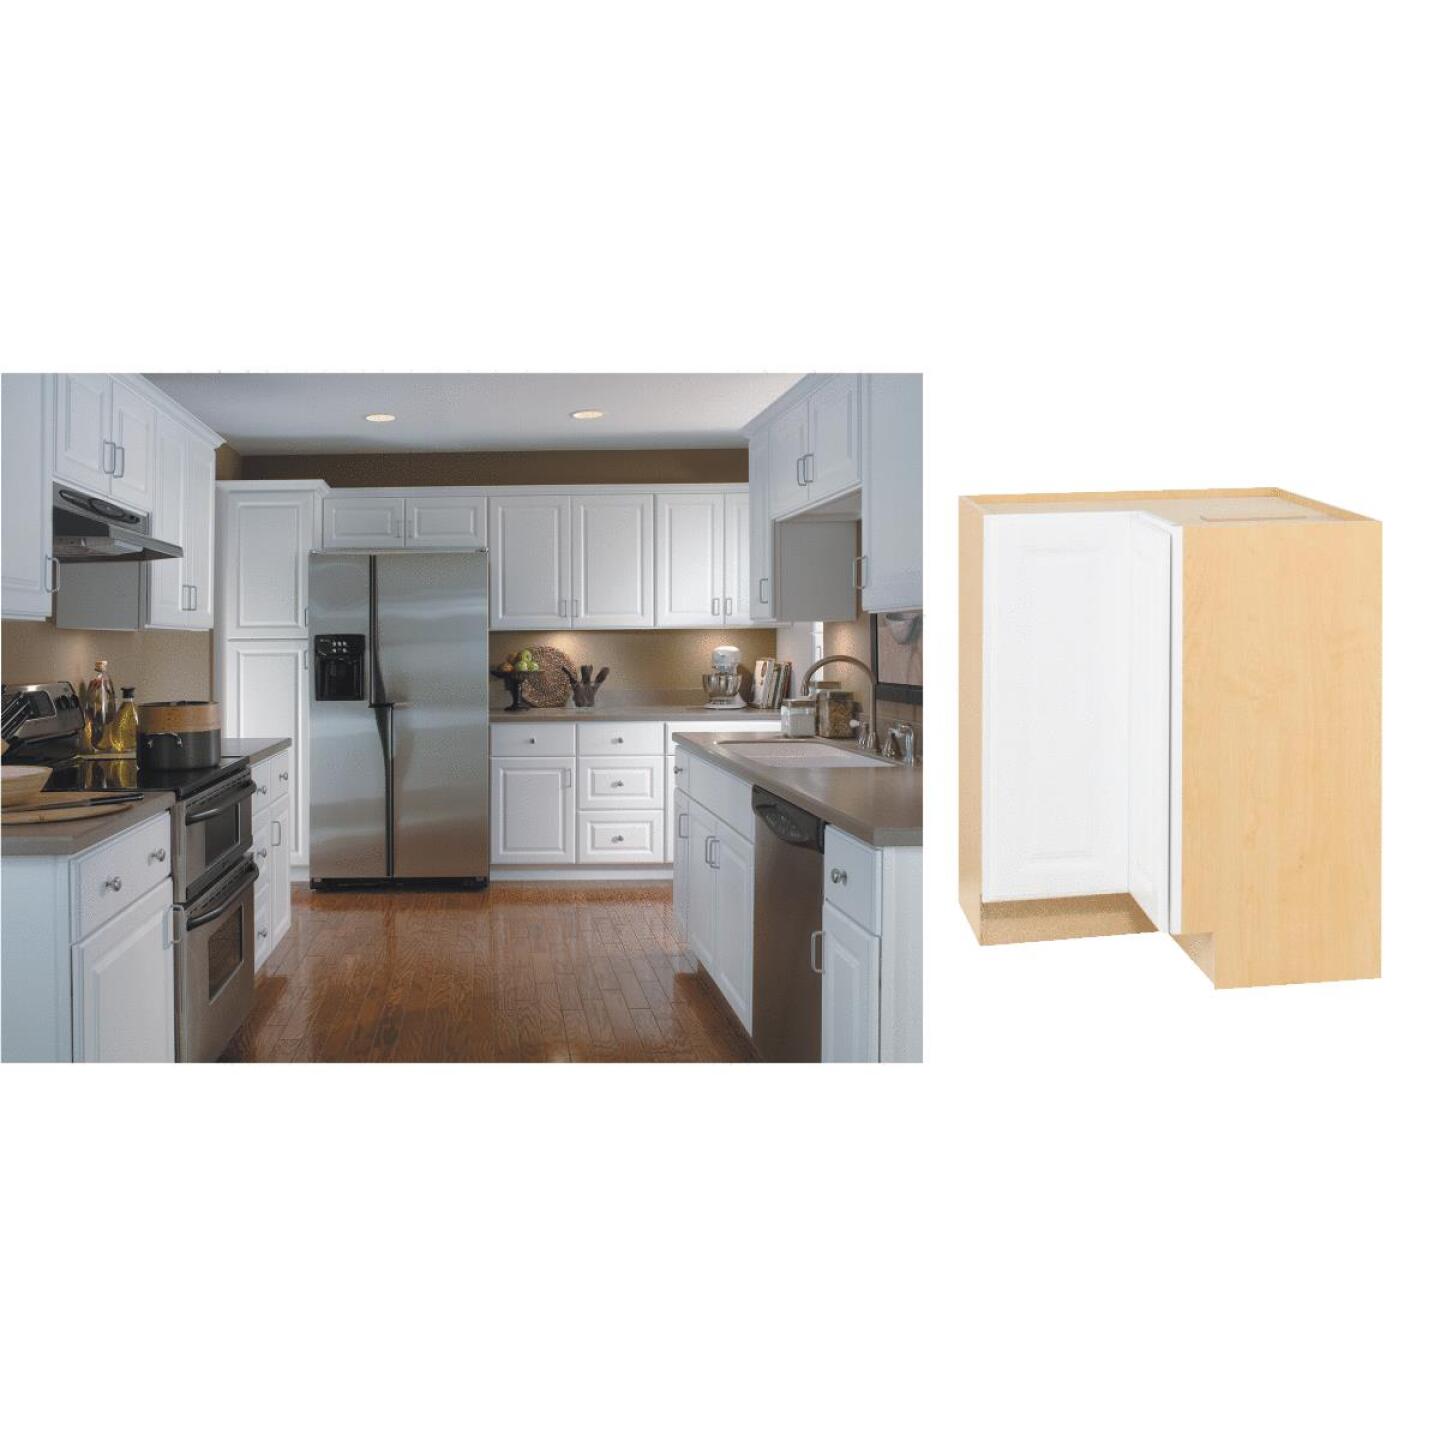 Continental Cabinets Hamilton 36 In W X 34 1 2 In H X 24 In D